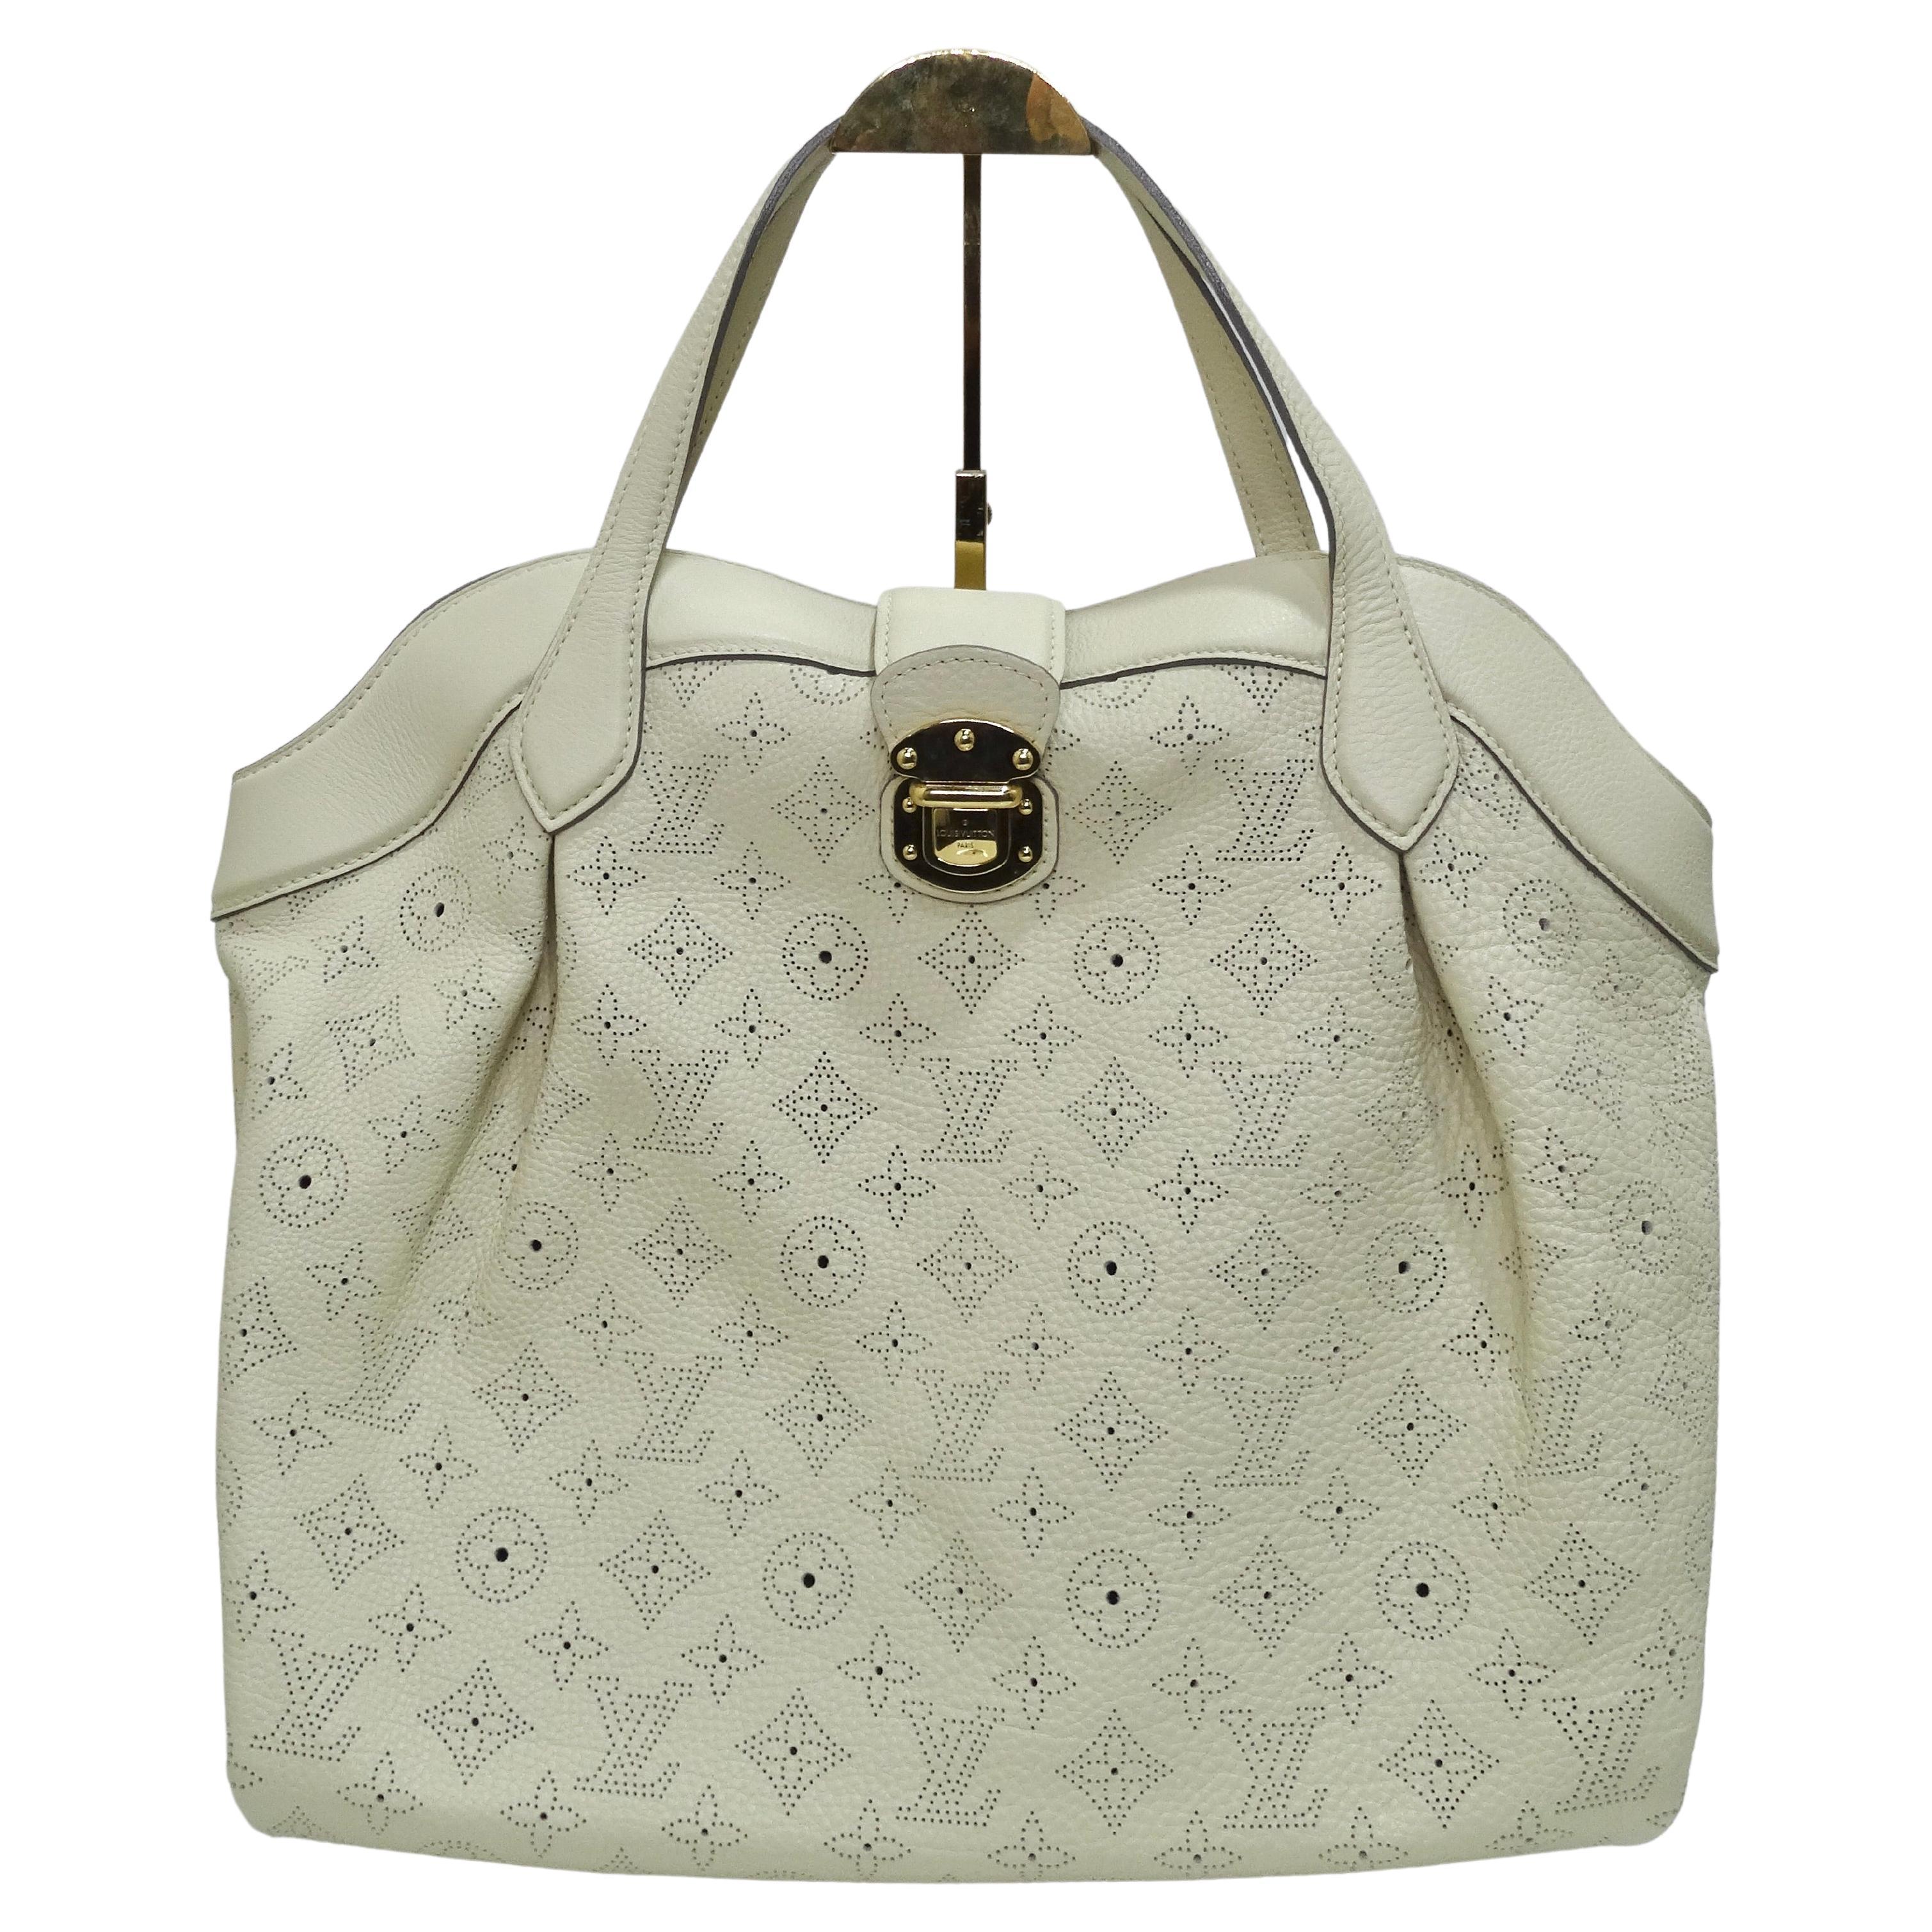 NOW TRENDING: Slouchy oversized bags! 
Ensure your daily essentials are in order and your outfit is complete with this designer Louis Vuitton bag. This Louis Vuitton PM Cirrus Mahina Handbag is crafted of the best materials in a perforated Monogram